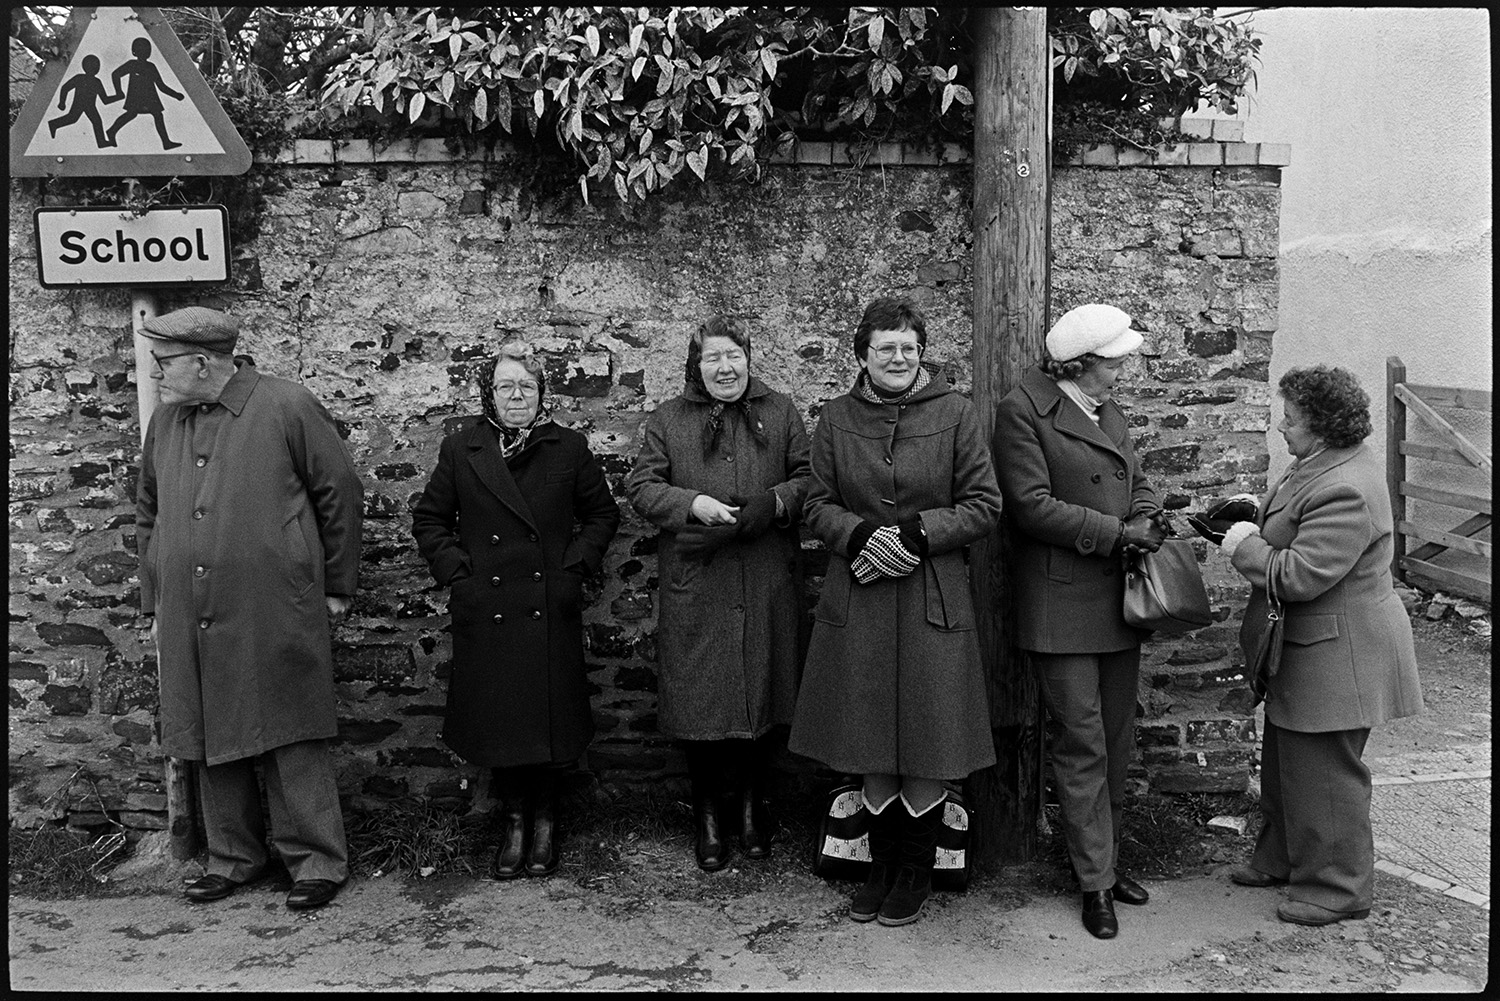 Pancake race in village street, children and spectators. 
[A man and five women stood by a stone wall in Fore Street, Dolton watching a pancake race in the street. Two of the women are talking.]